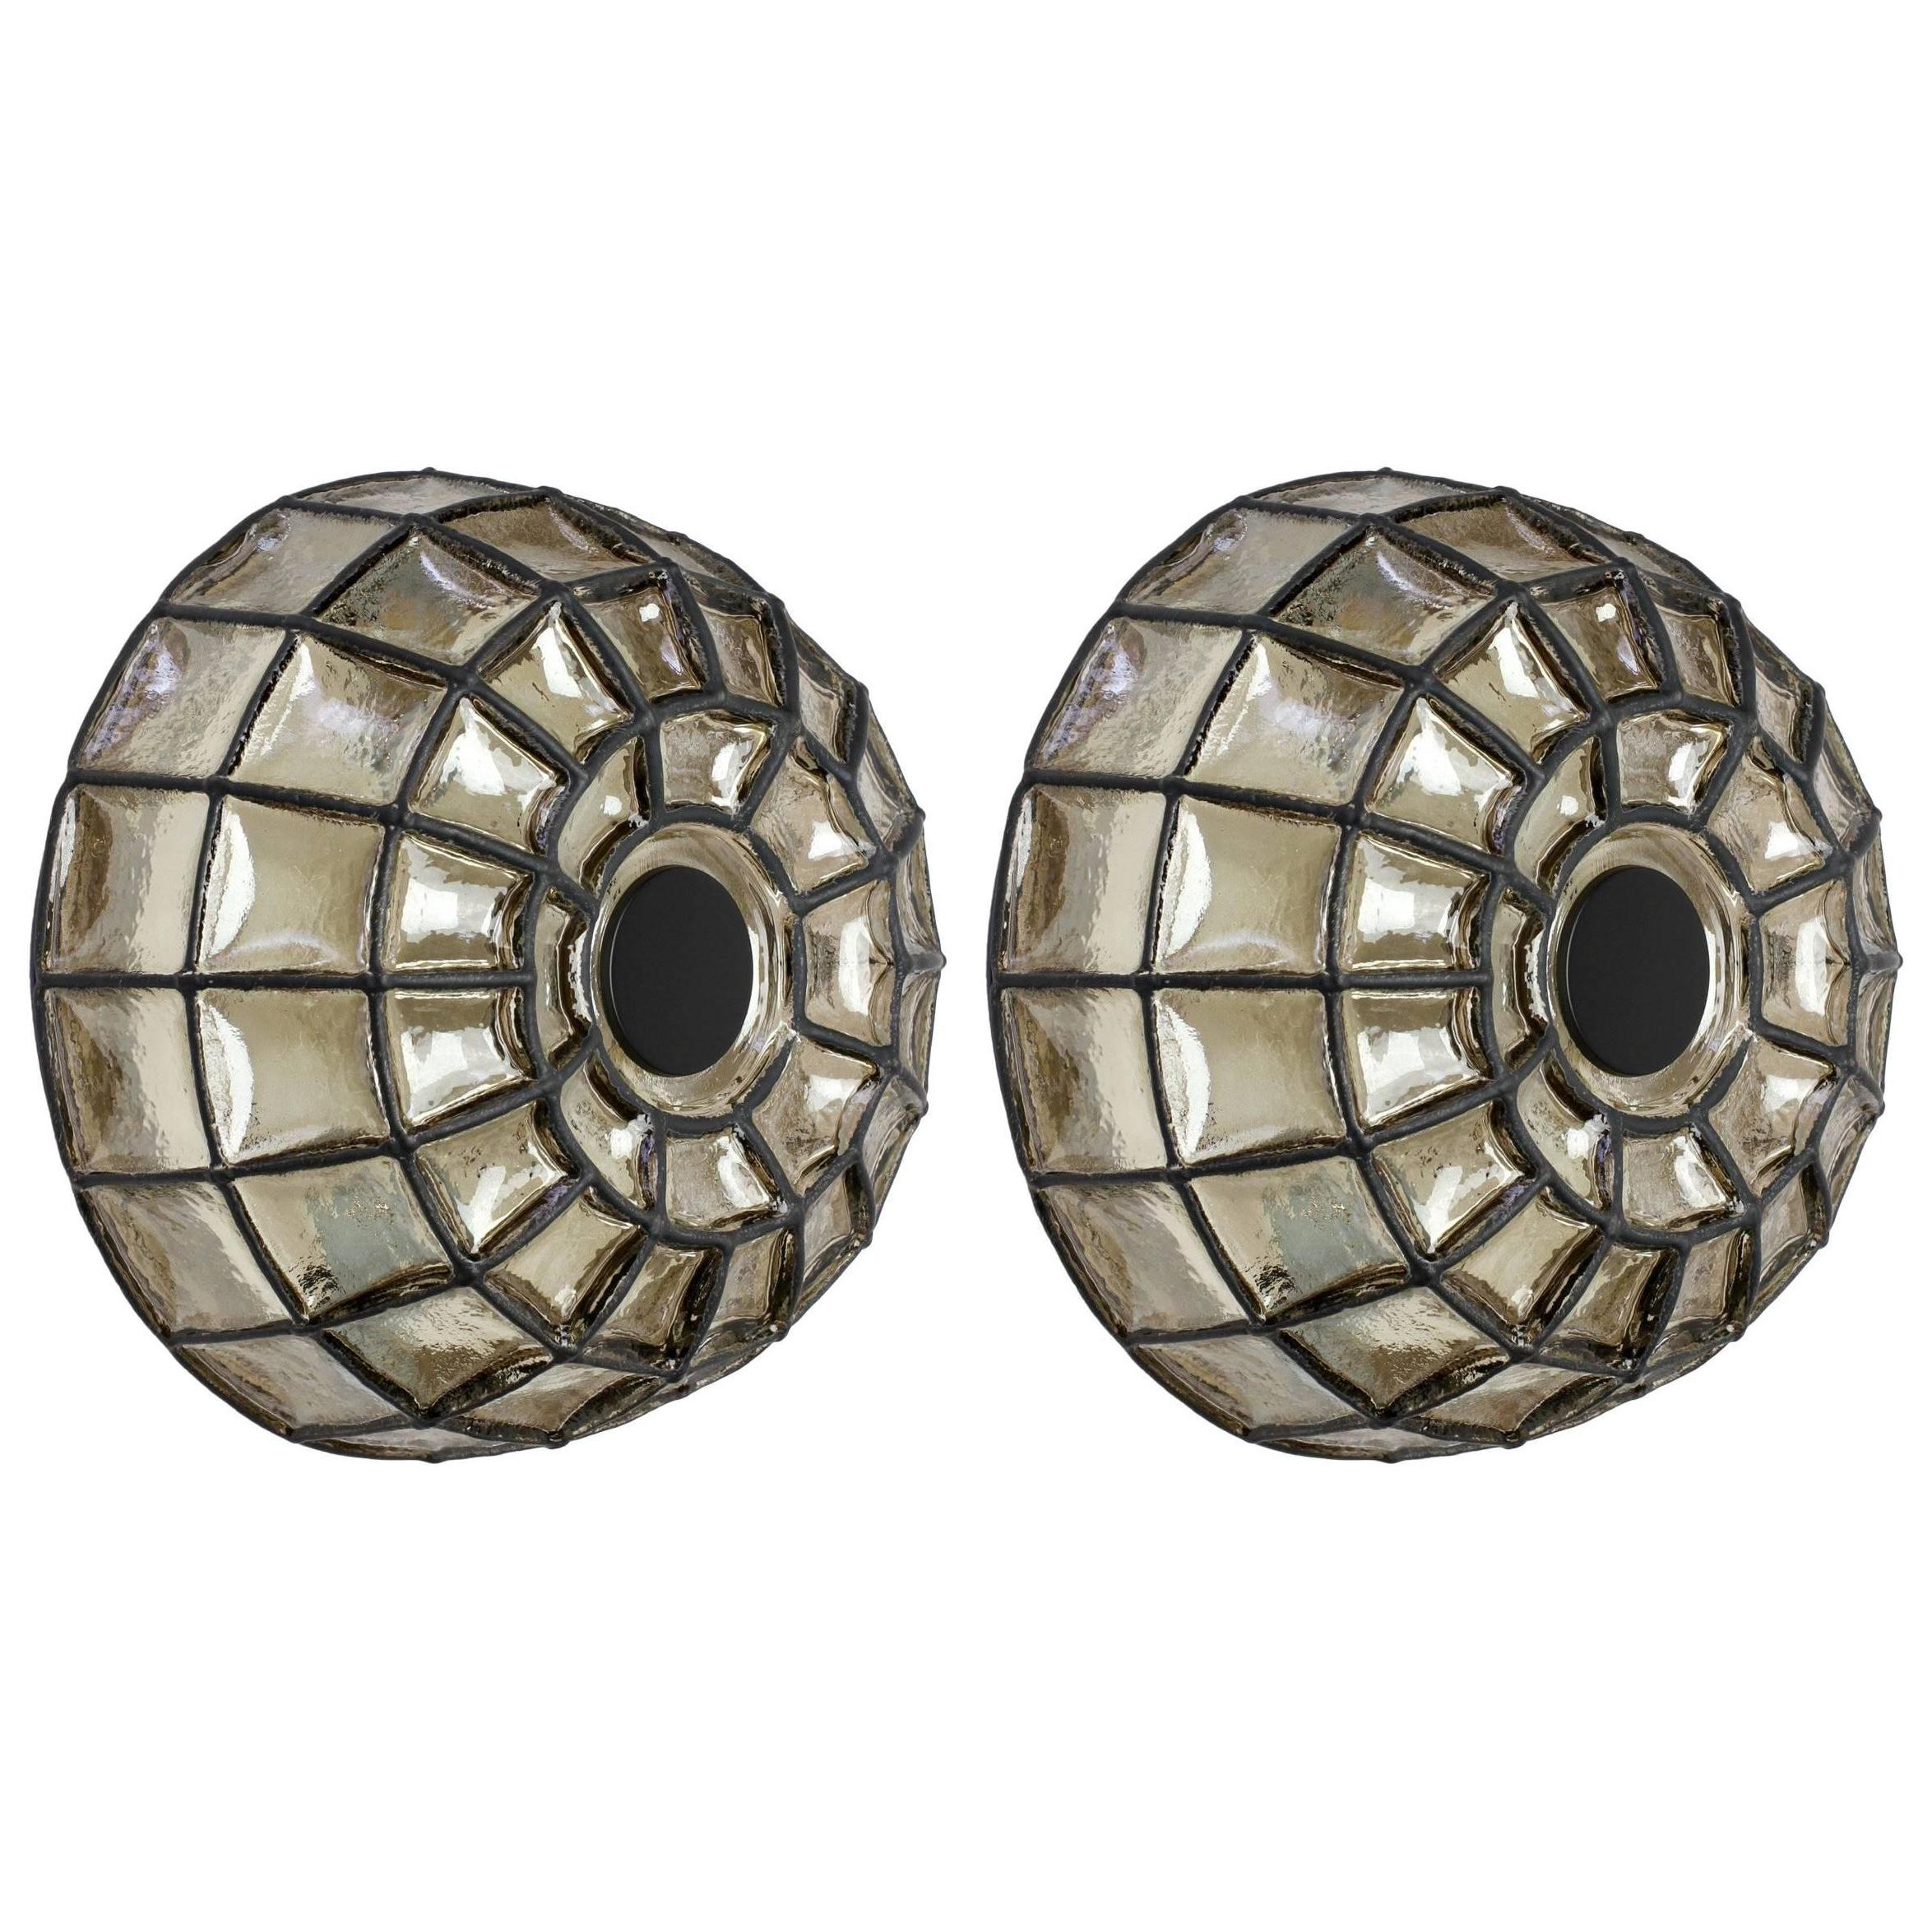 Limburg Pair of German Midcentury Black Iron and Glass Domed Wall Light Sconces